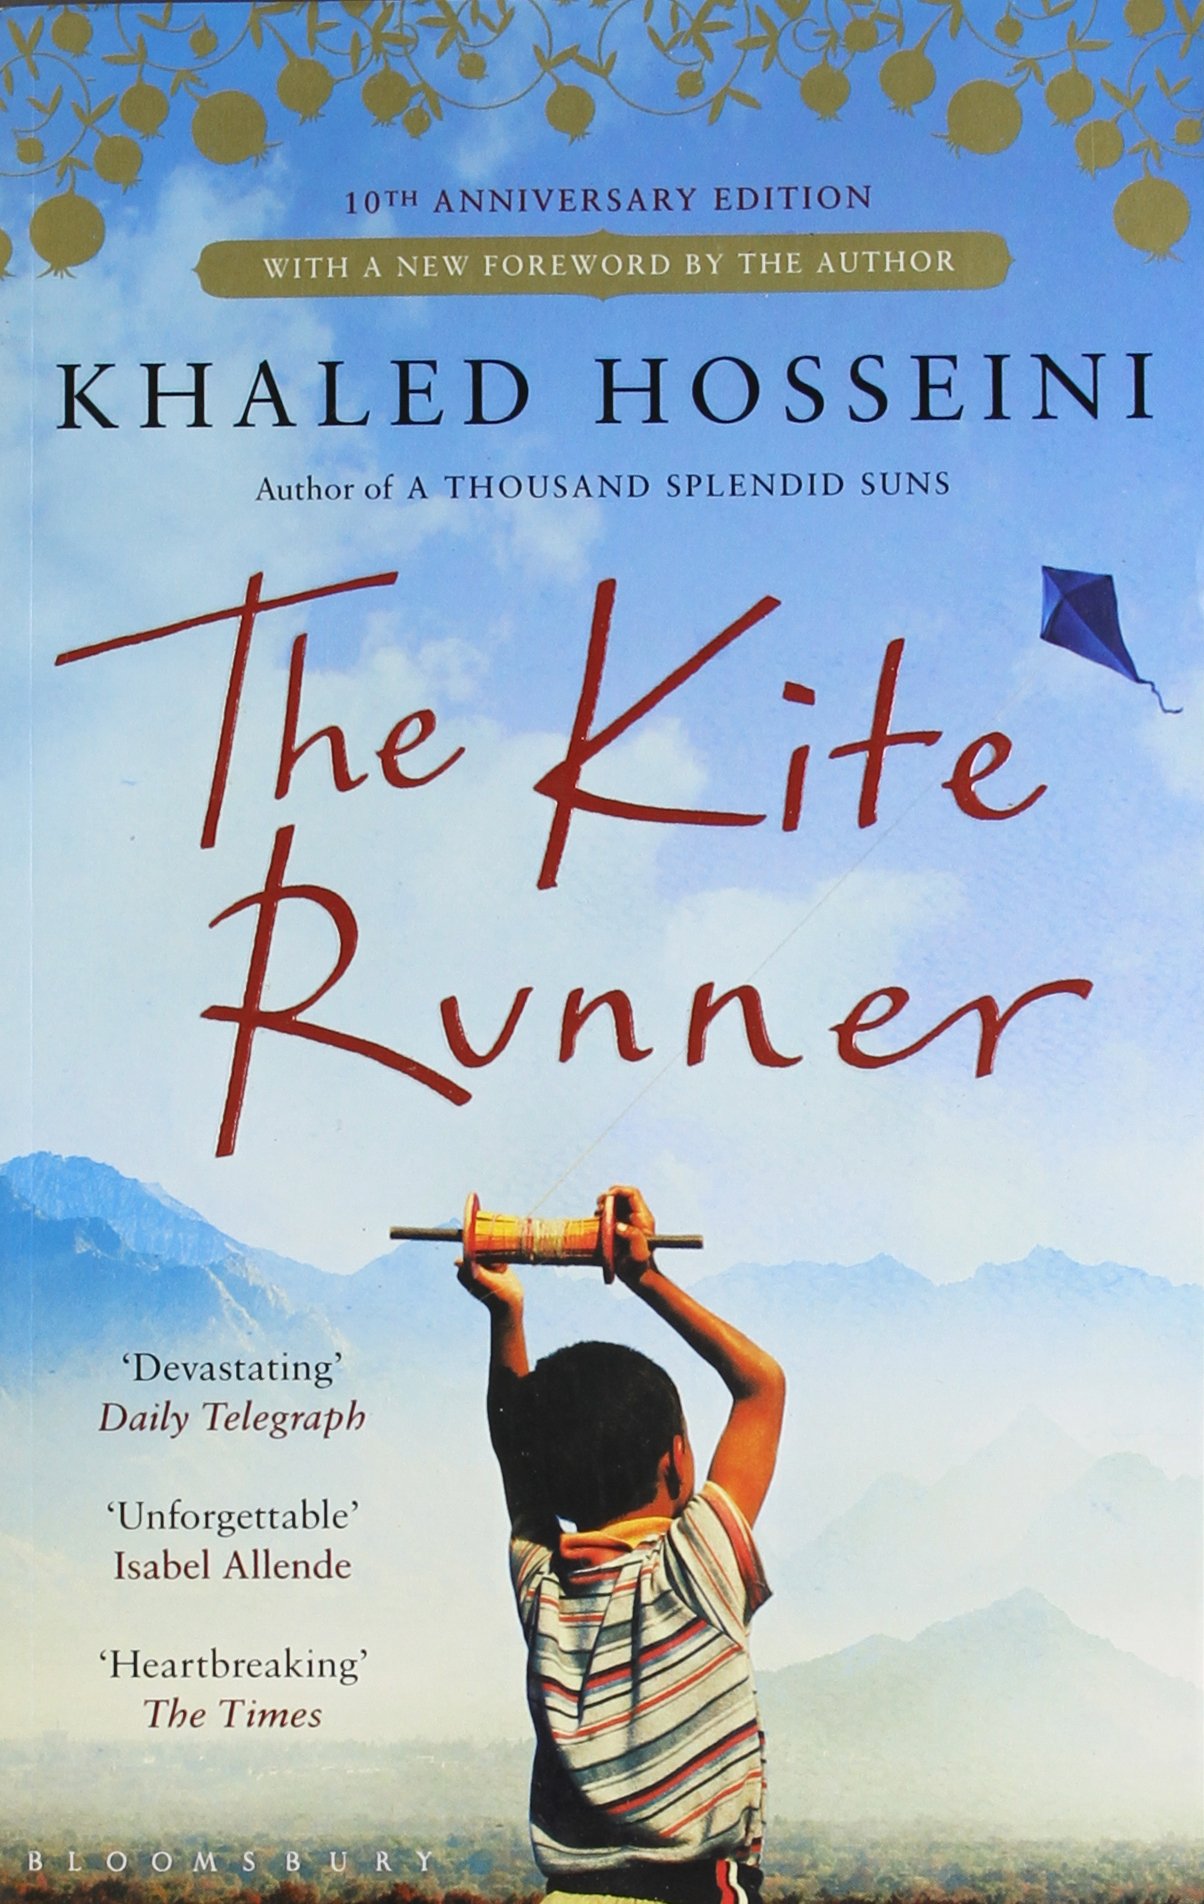 book review of the kite runner by khaled hosseini